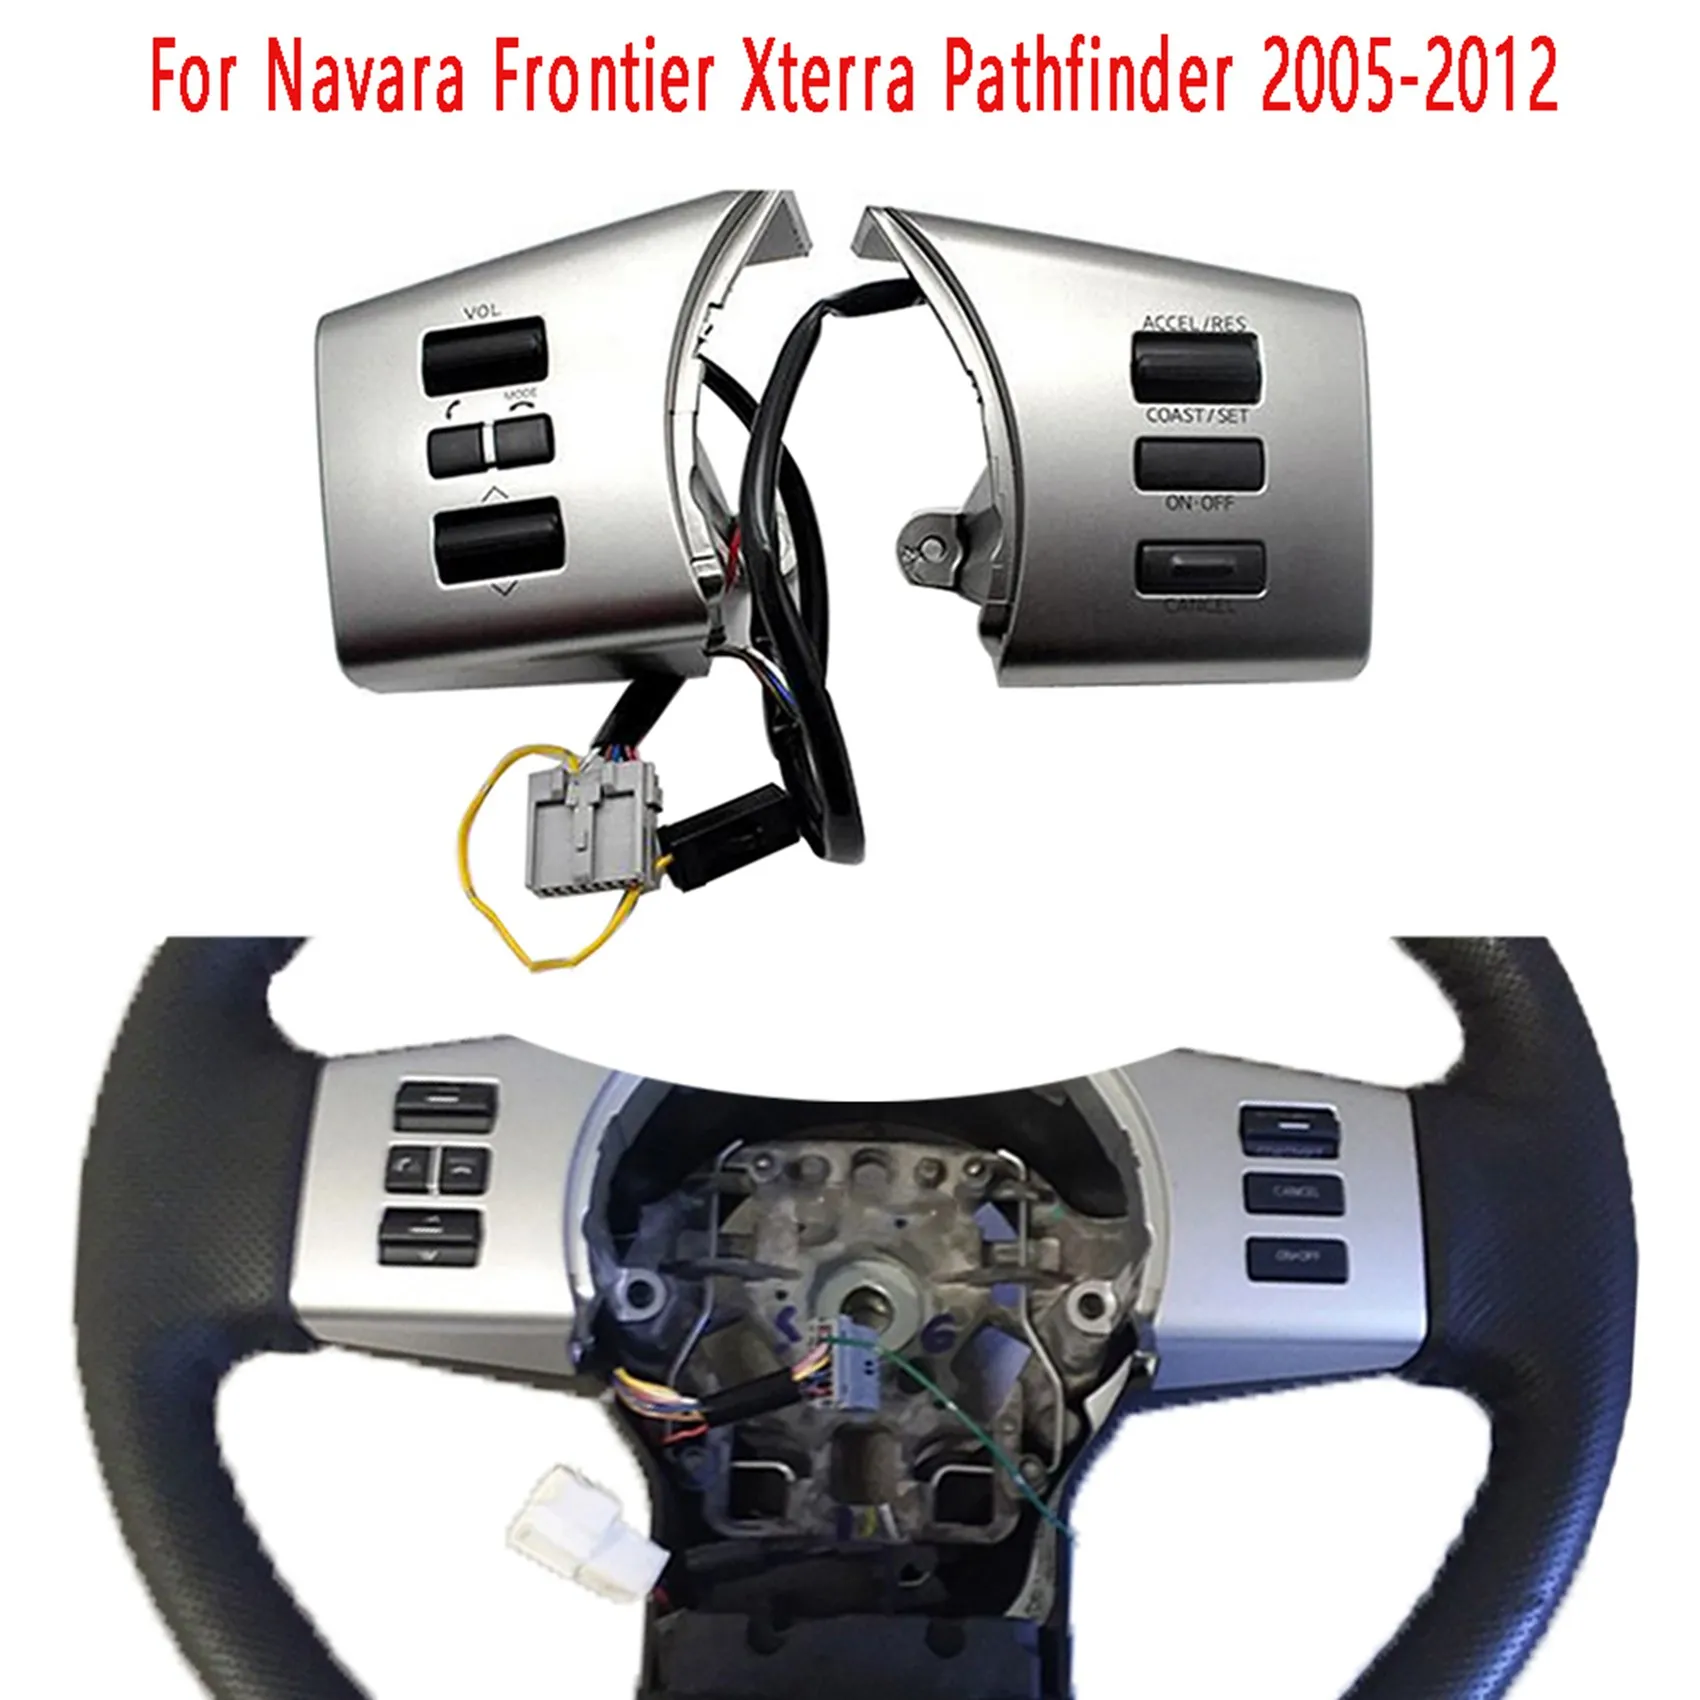 

Steering Wheel Cruise Control Buttons Volume Controls Switch for Nissan Navara Frontier Xterra Pathfinder 2005-2012